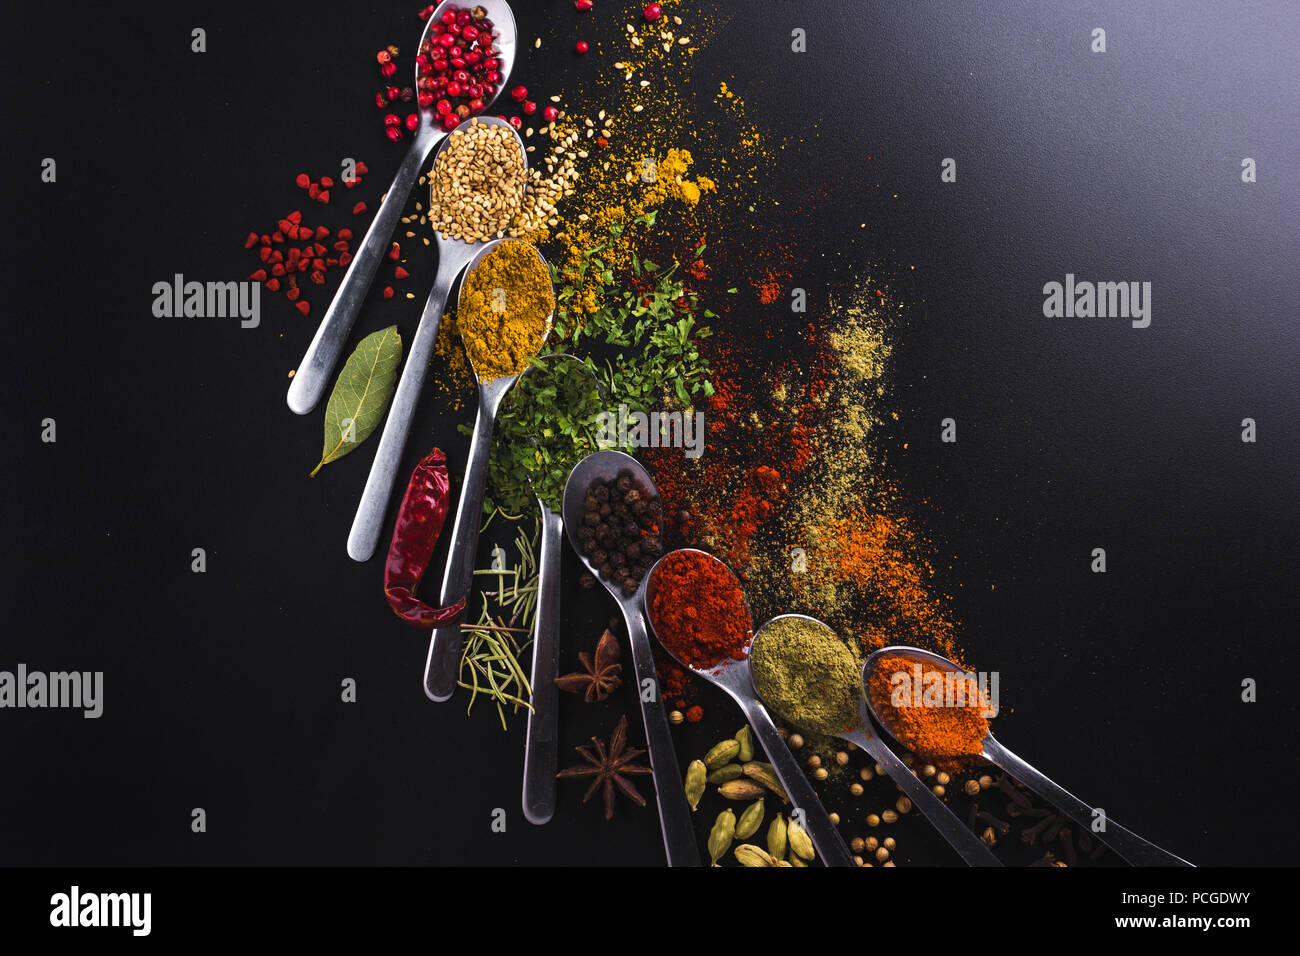 Composition of small spoons full of spices and condiments for cooking on a  black background Stock Photo